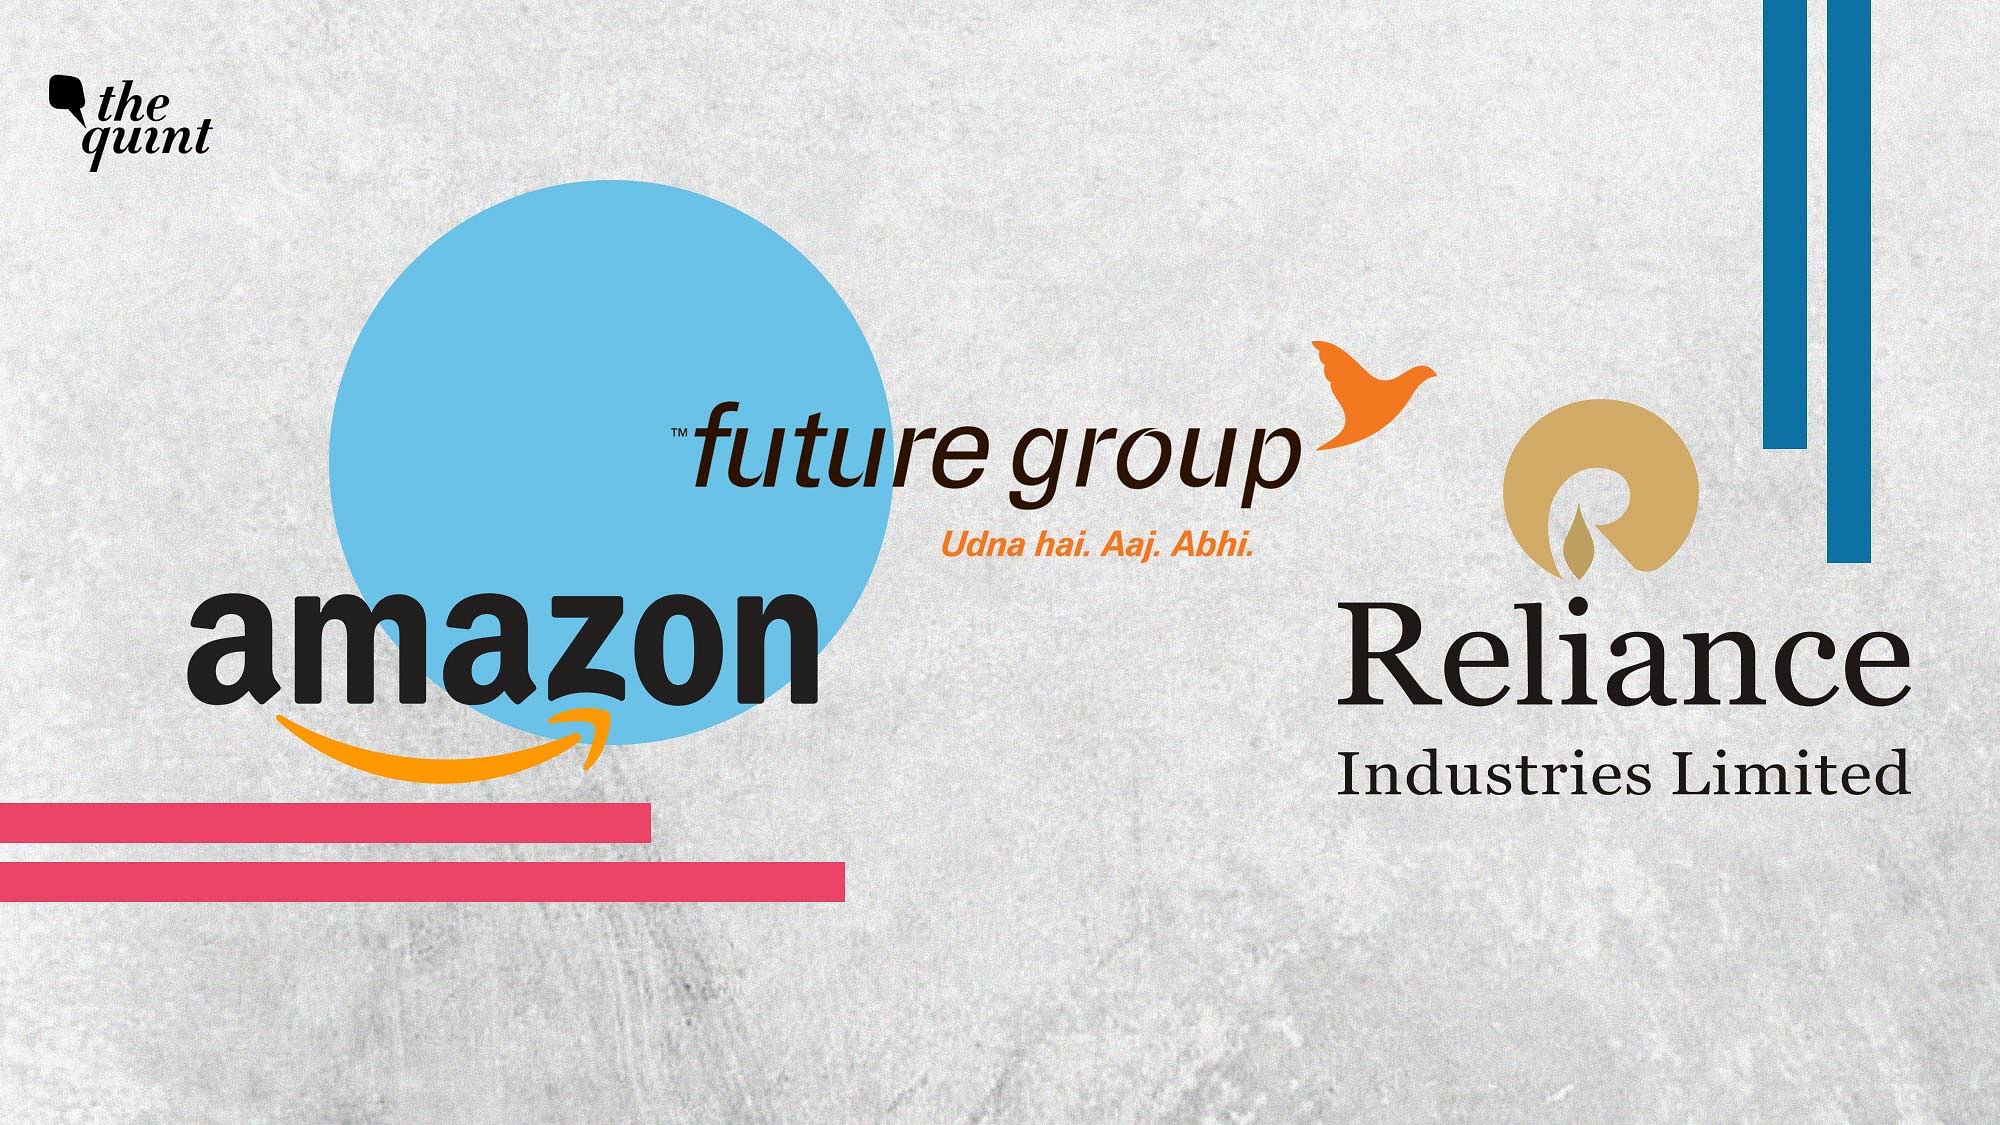 Amazon are seeking to block the deal between Reliance and Future Group for purchase of stores like Big Bazaar.